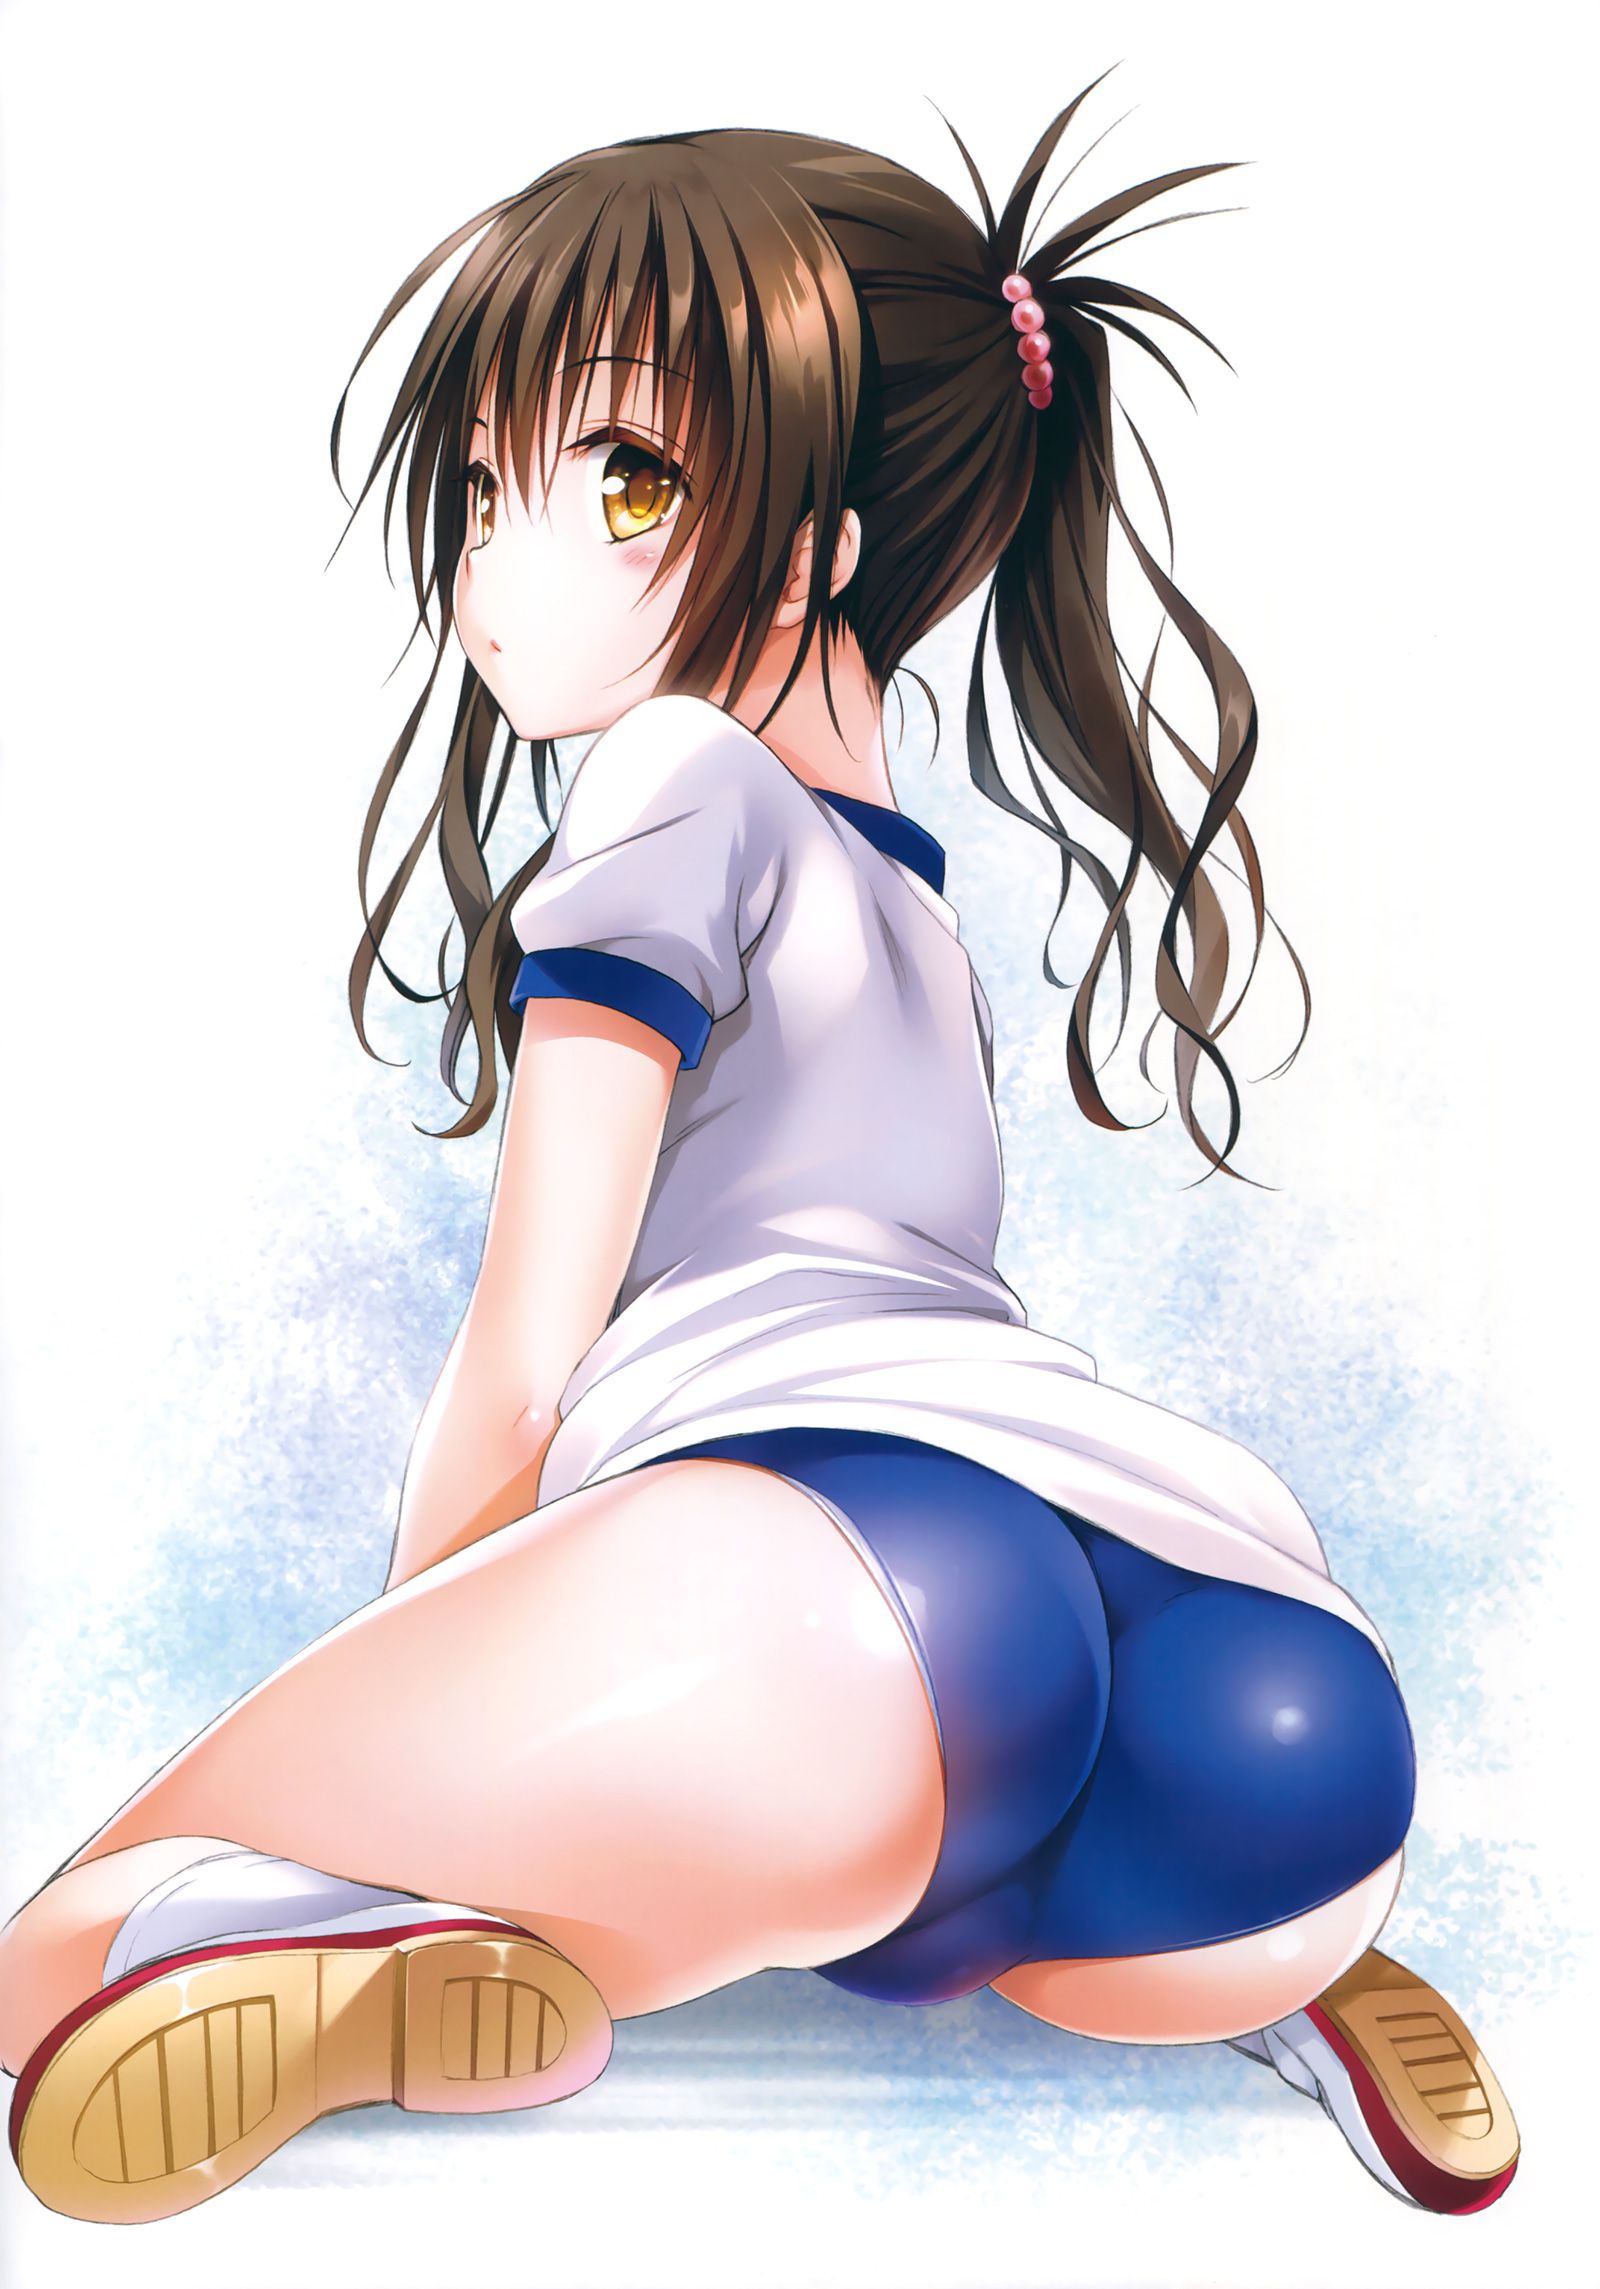 Erotic image roundup of gym clothes and bloomers! 32